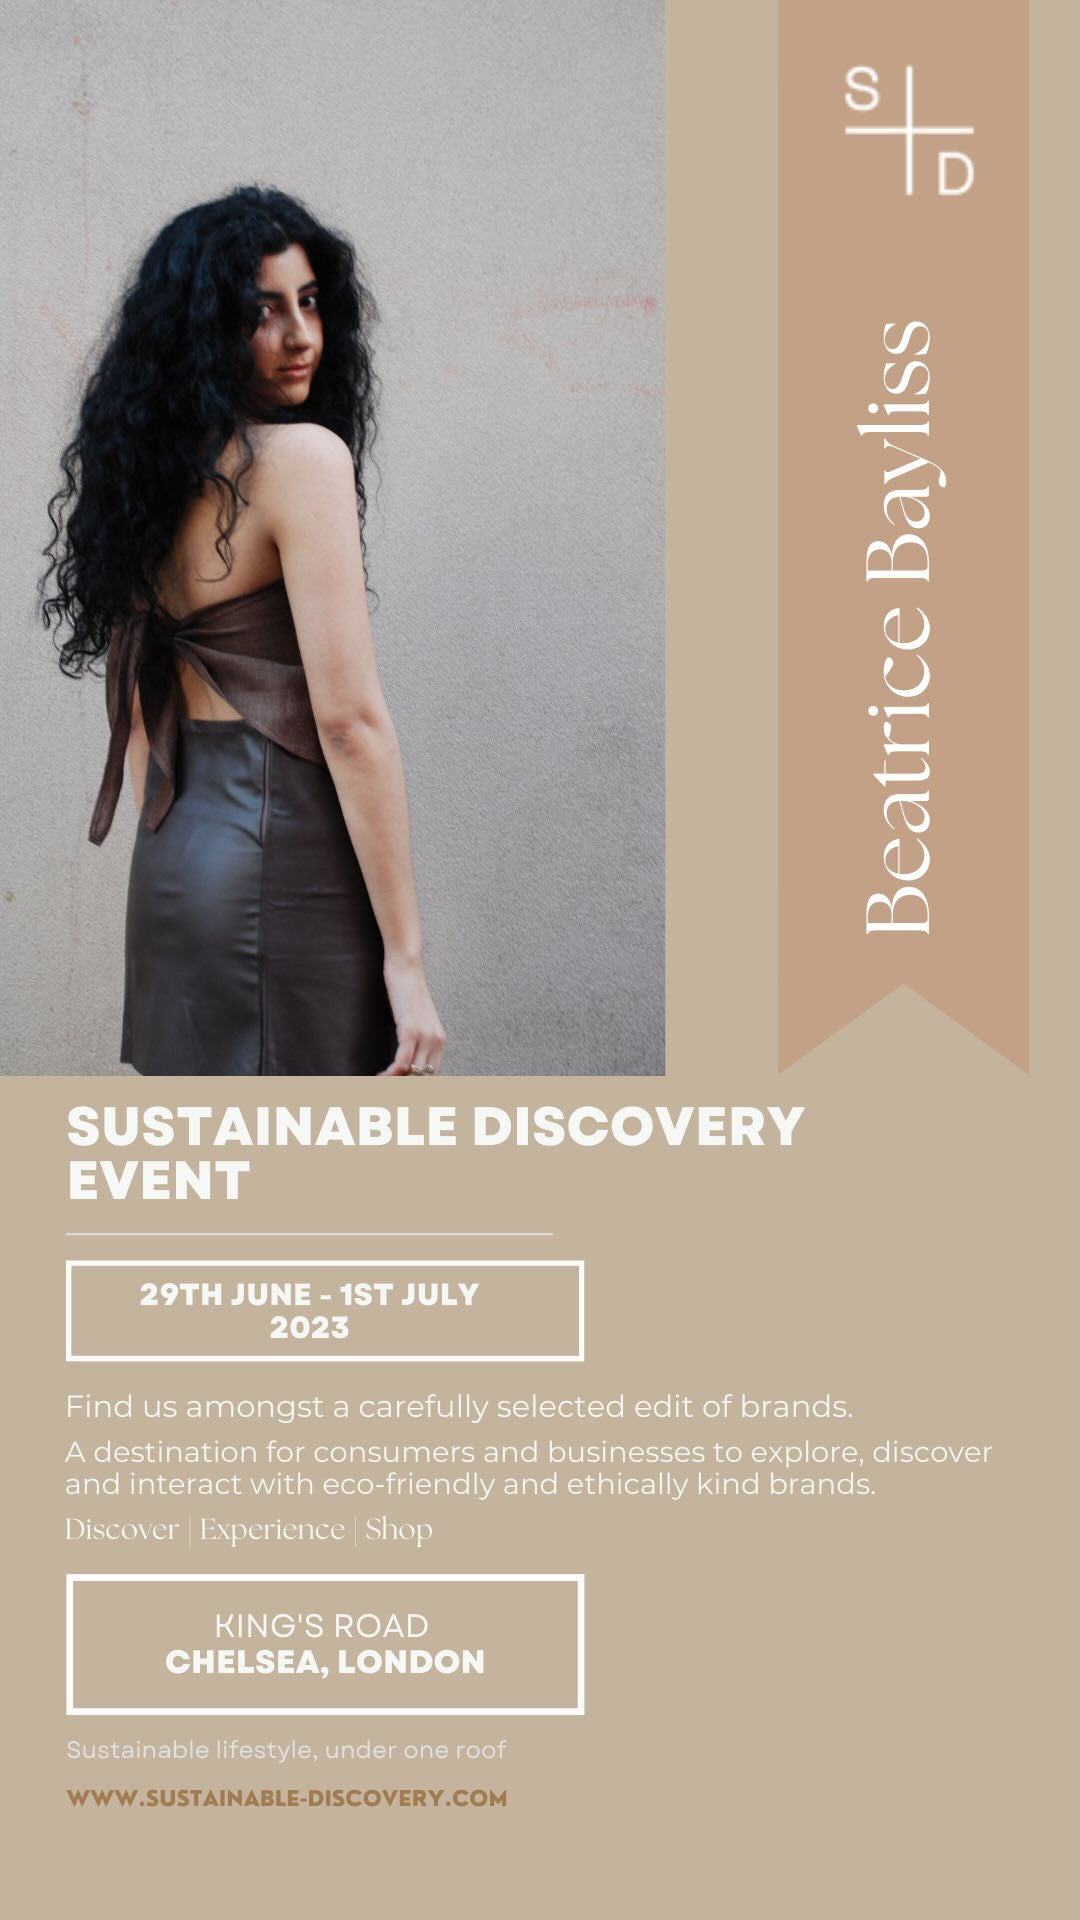 Will we see you at the King’s Road sustainable popup?